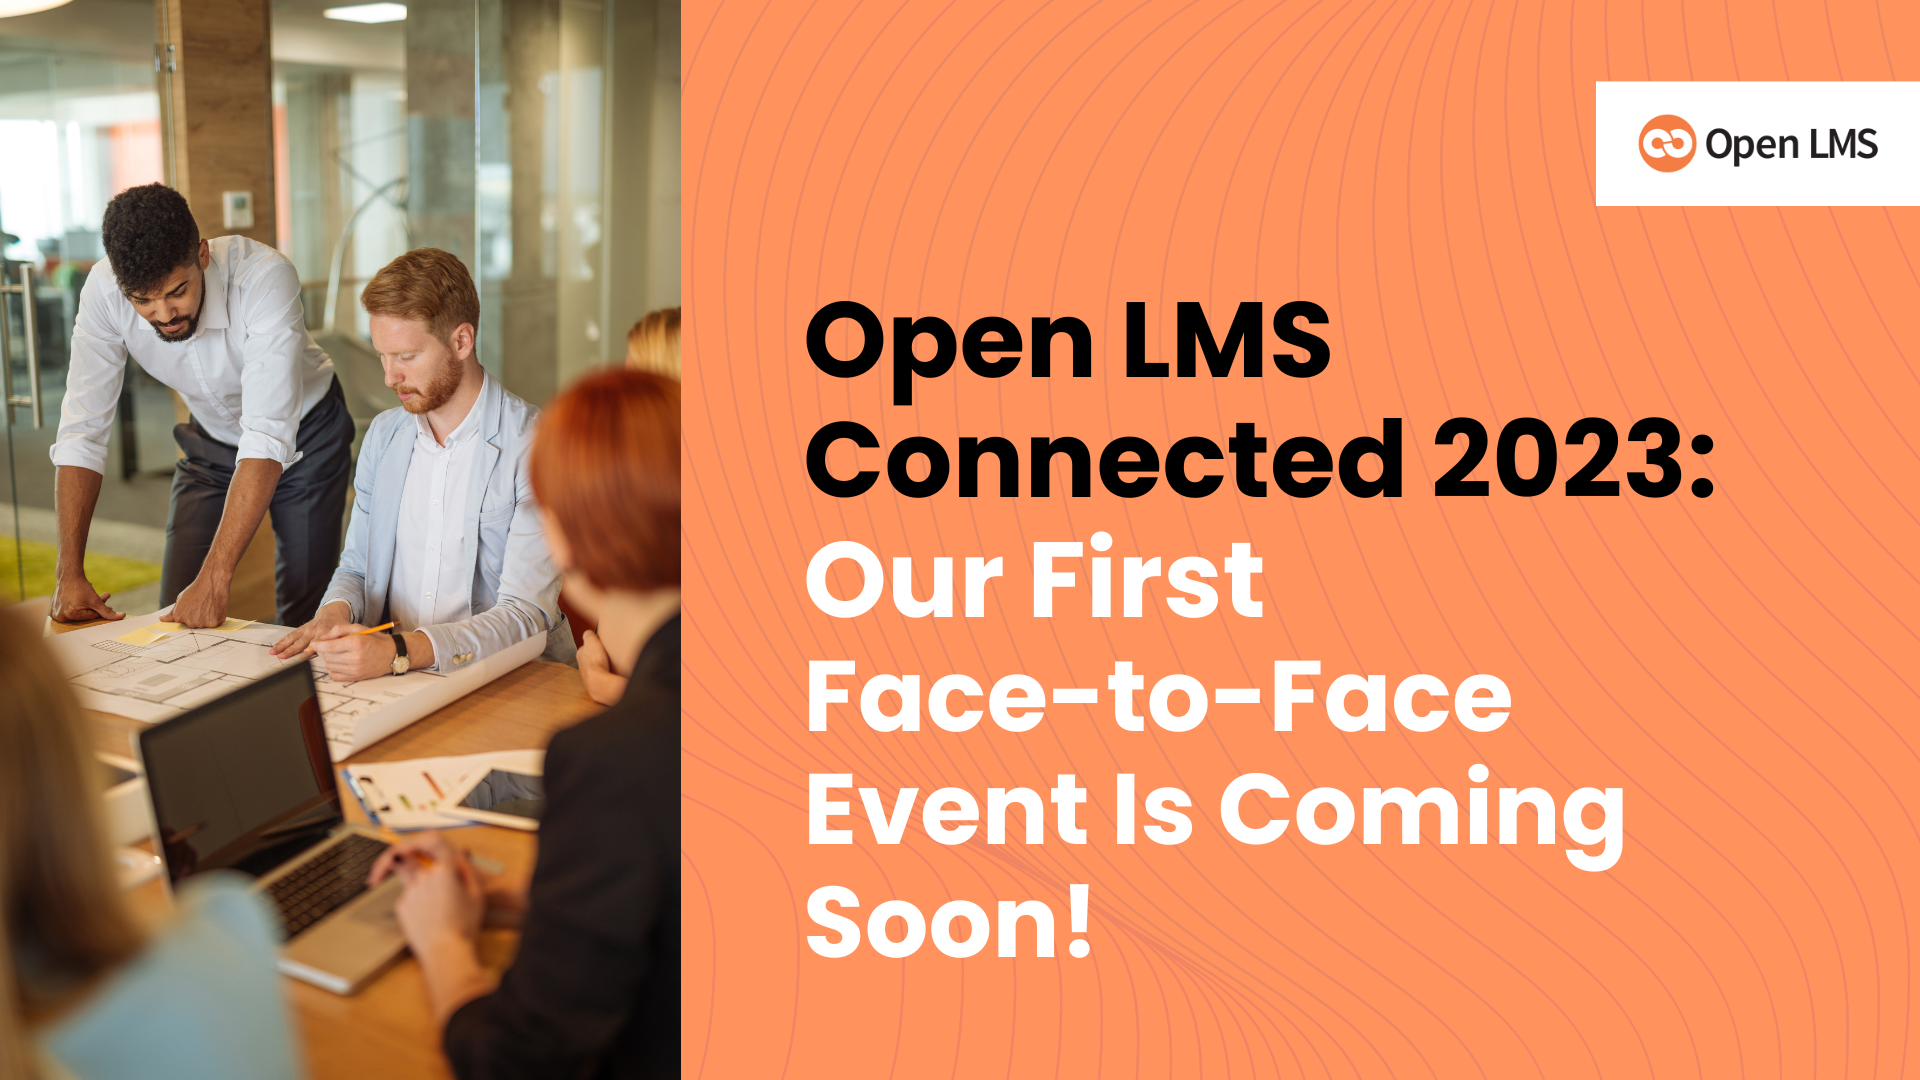 Open LMS Connected 2023: Our First Face-to-Face Event Is Coming Soon!